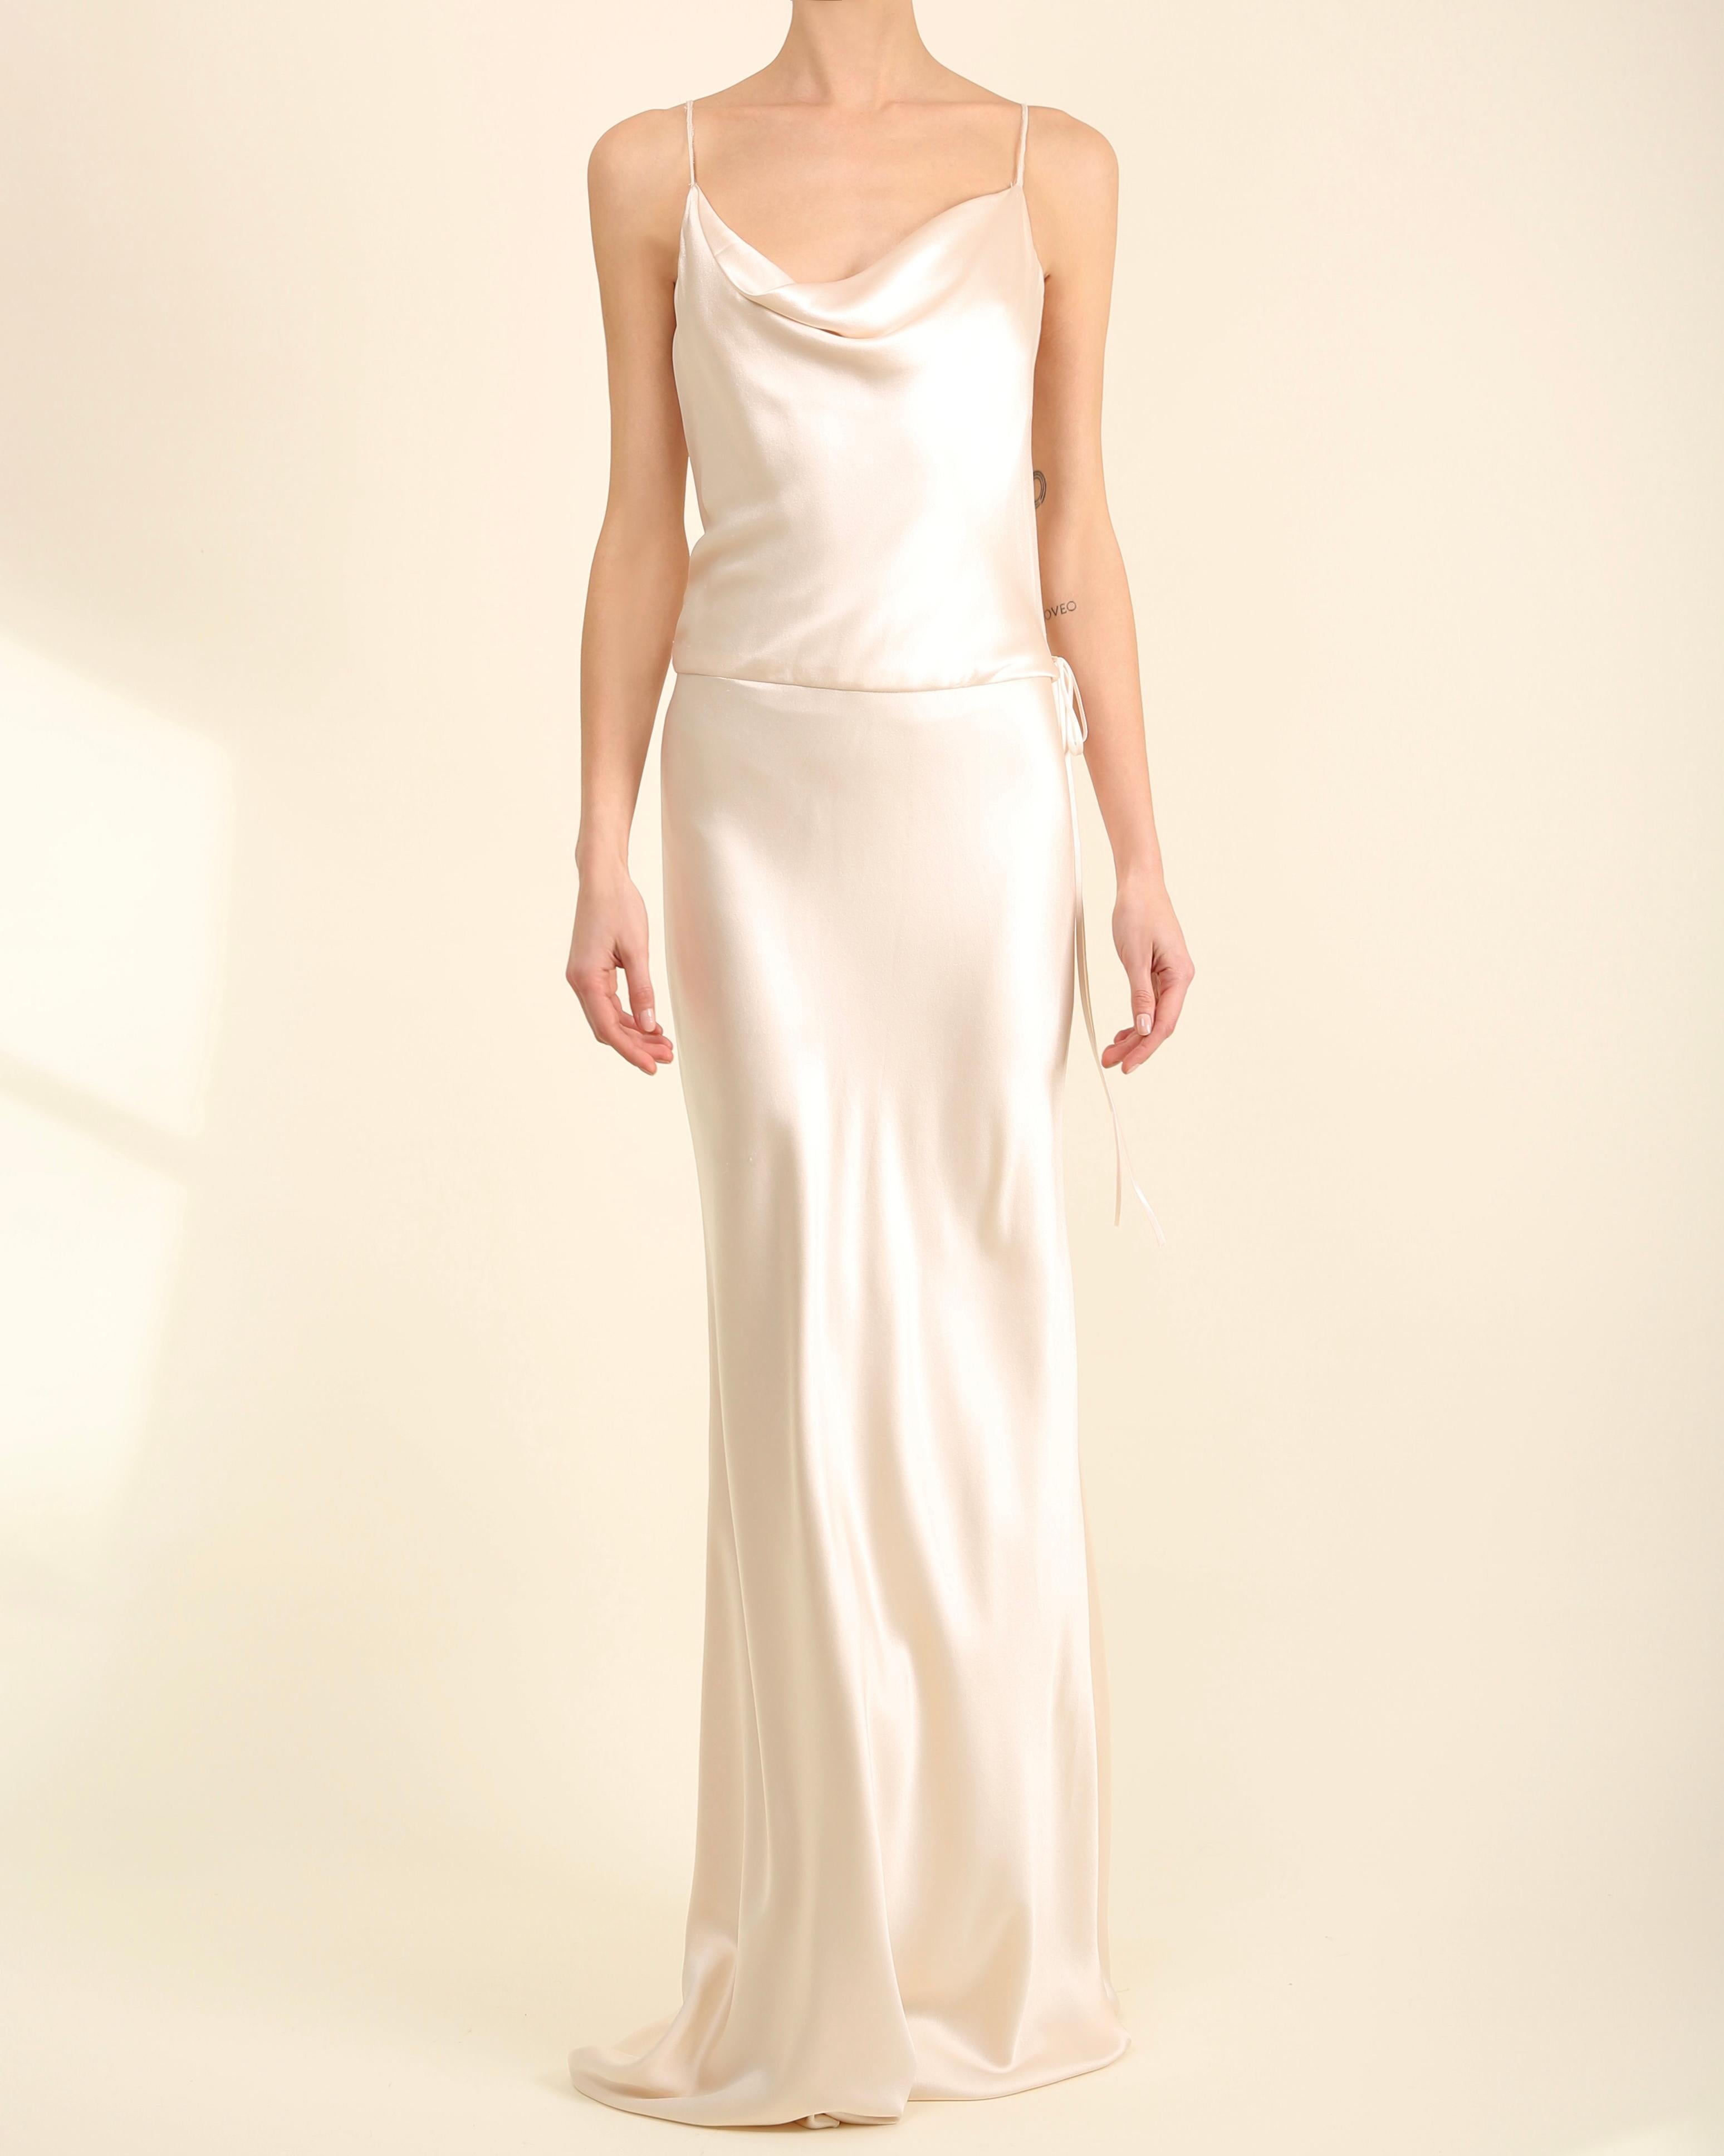 Monique L'huillier ivory silk draped wedding dress gown with low back and train For Sale 5